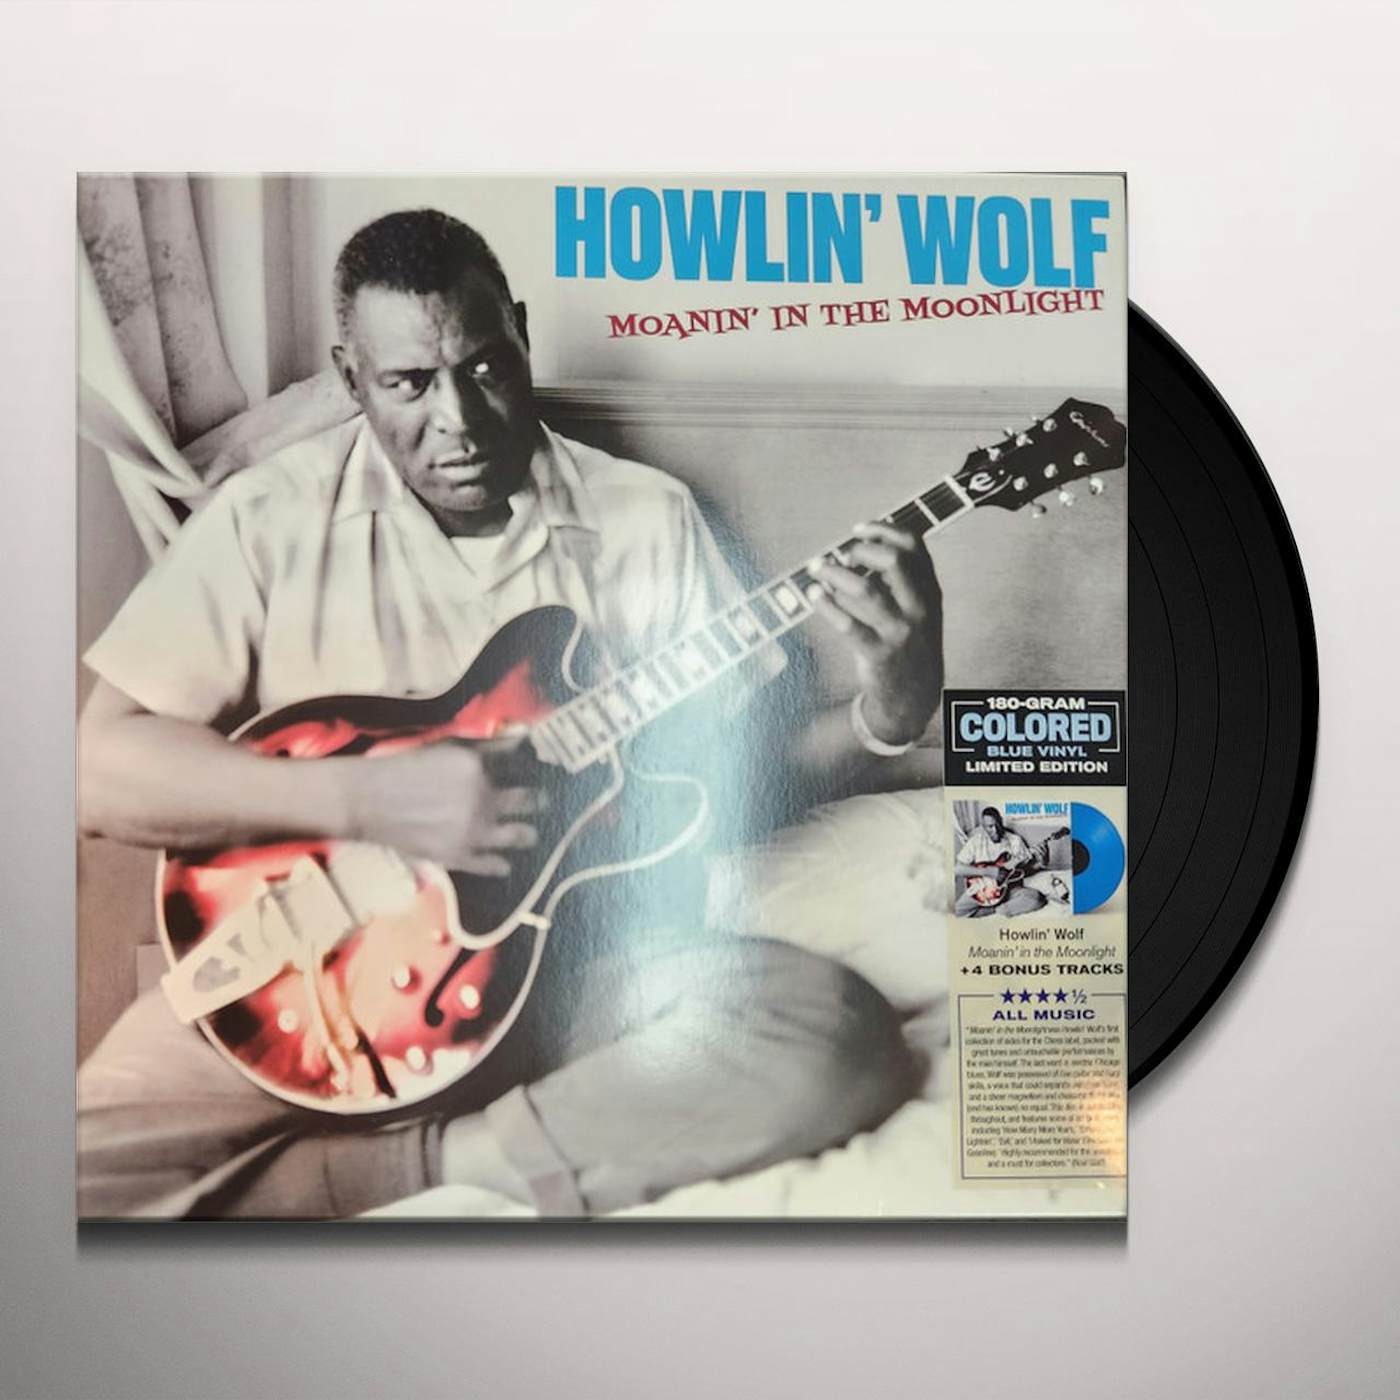 Howlin' Wolf MOANIN' IN THE MOONLIGHT Vinyl Record